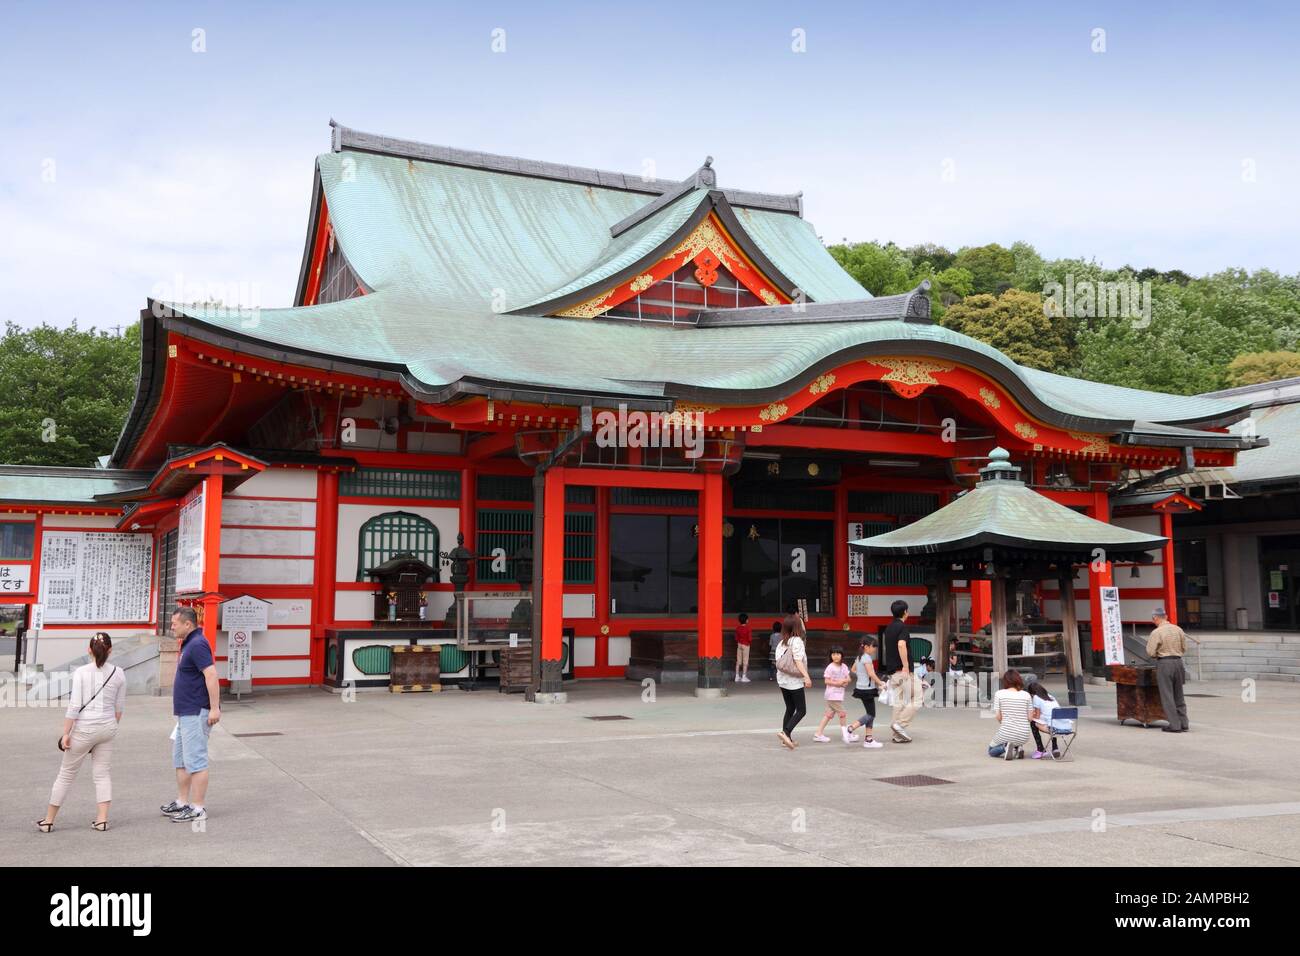 INUYAMA, JAPAN - MAY 3, 2012: People visit Narita-San Temple in Inuyama, Japan. The Shingon sect Buddhist temple was opened in 1953. Stock Photo